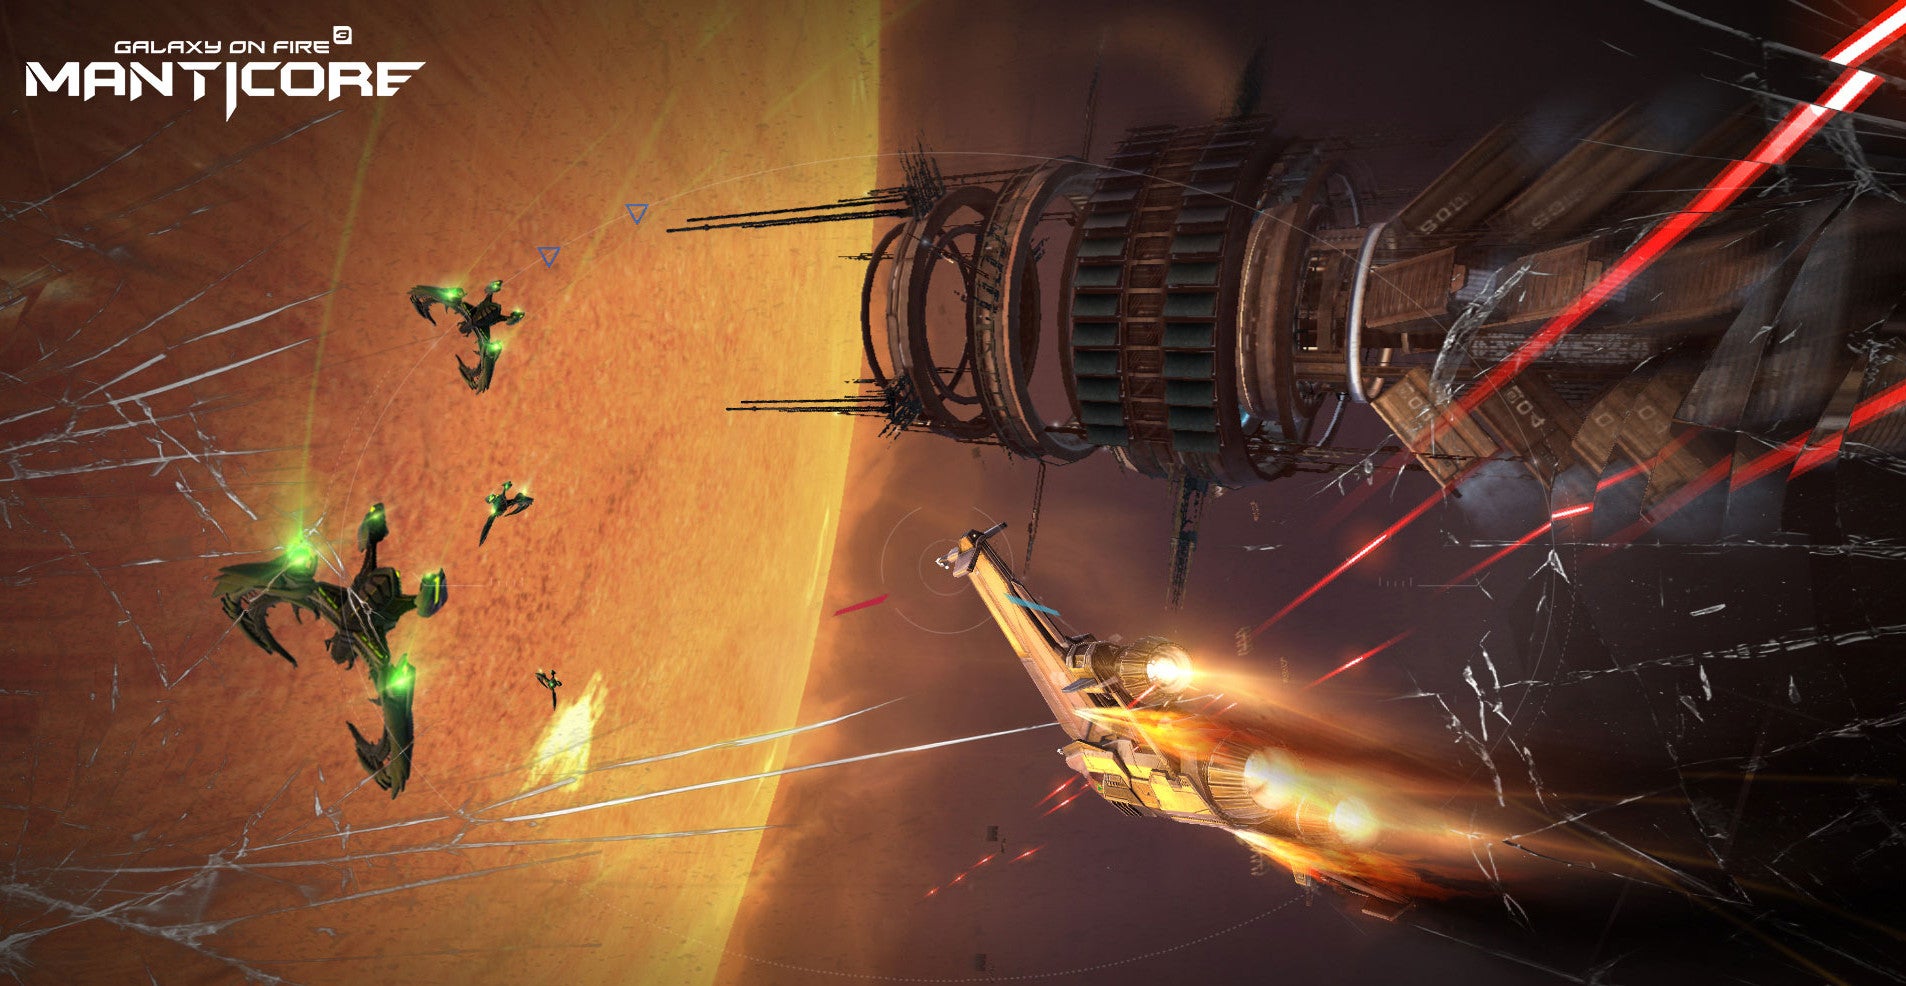 Sci-fi epic game Galaxy on Fire 3 – Manticore launched on iOS